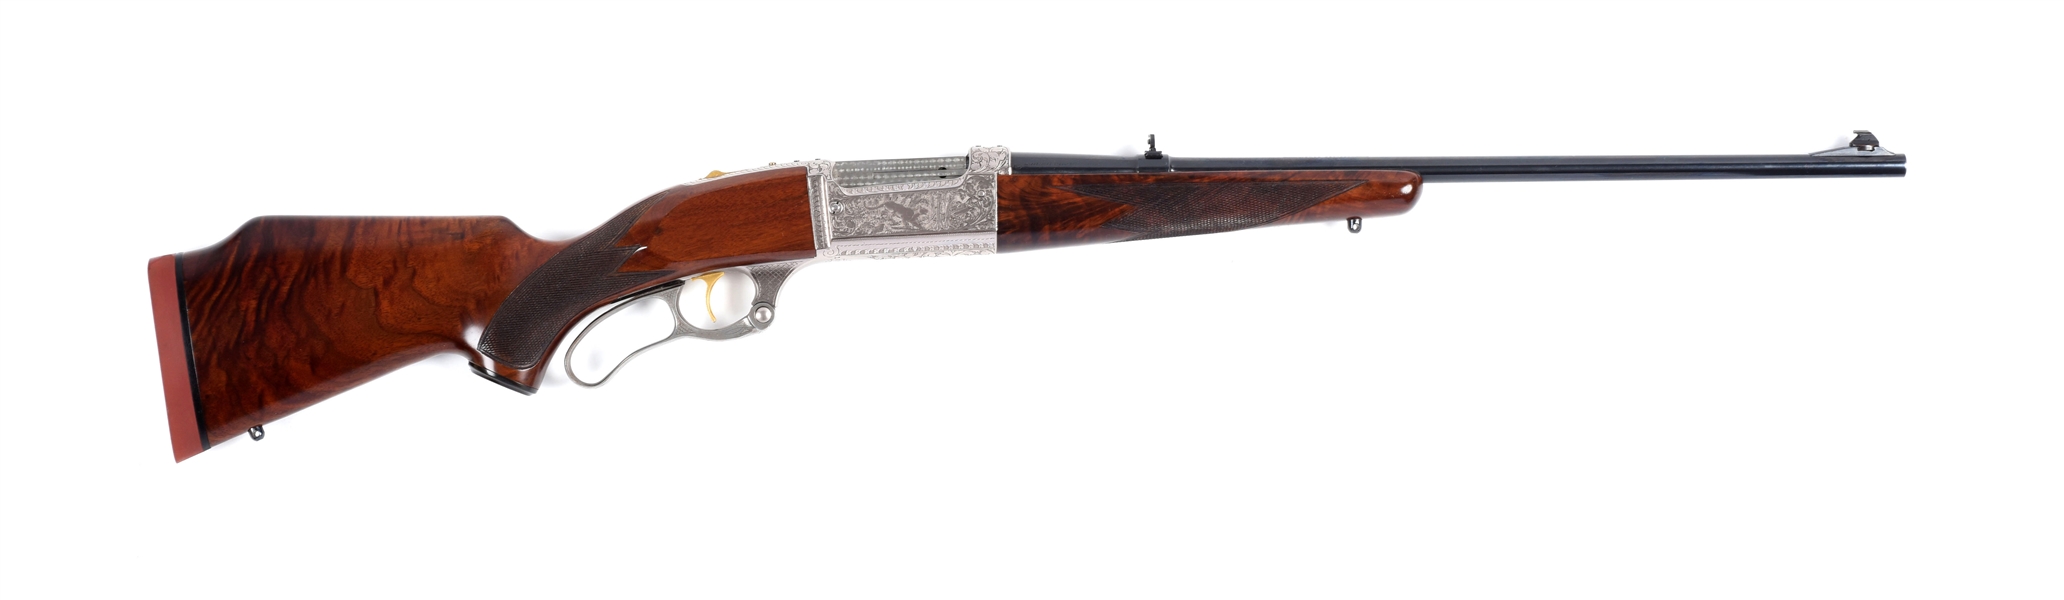 (M) DELUXE FACTORY ENGRAVED SAVAGE MODEL 99 PE LEVER ACTION RIFLE.